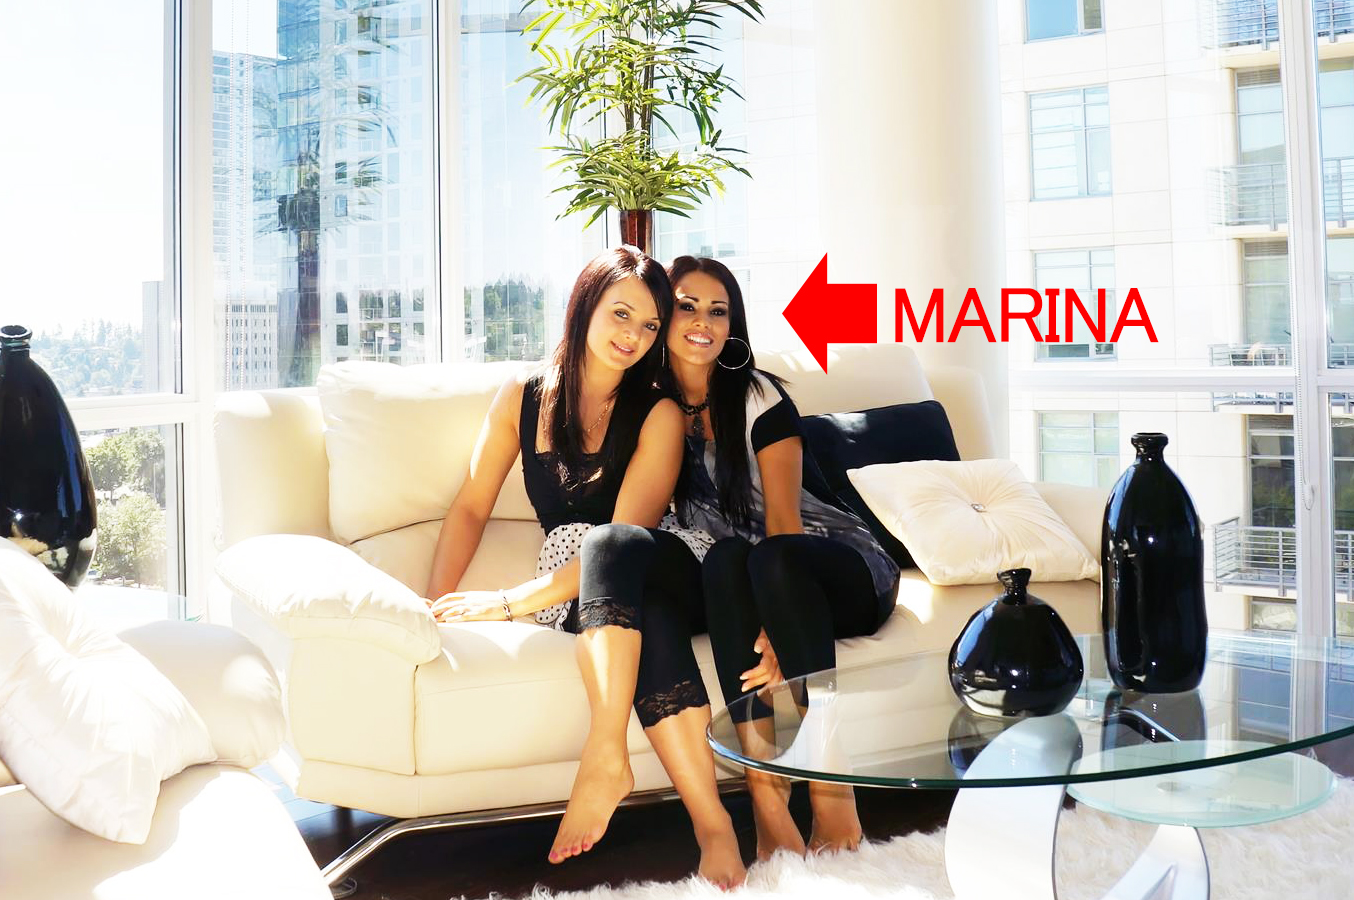 Marina allows her sister to enjoy some of the luxurious life is earned by committing fraud and stealing millions from Russian community.